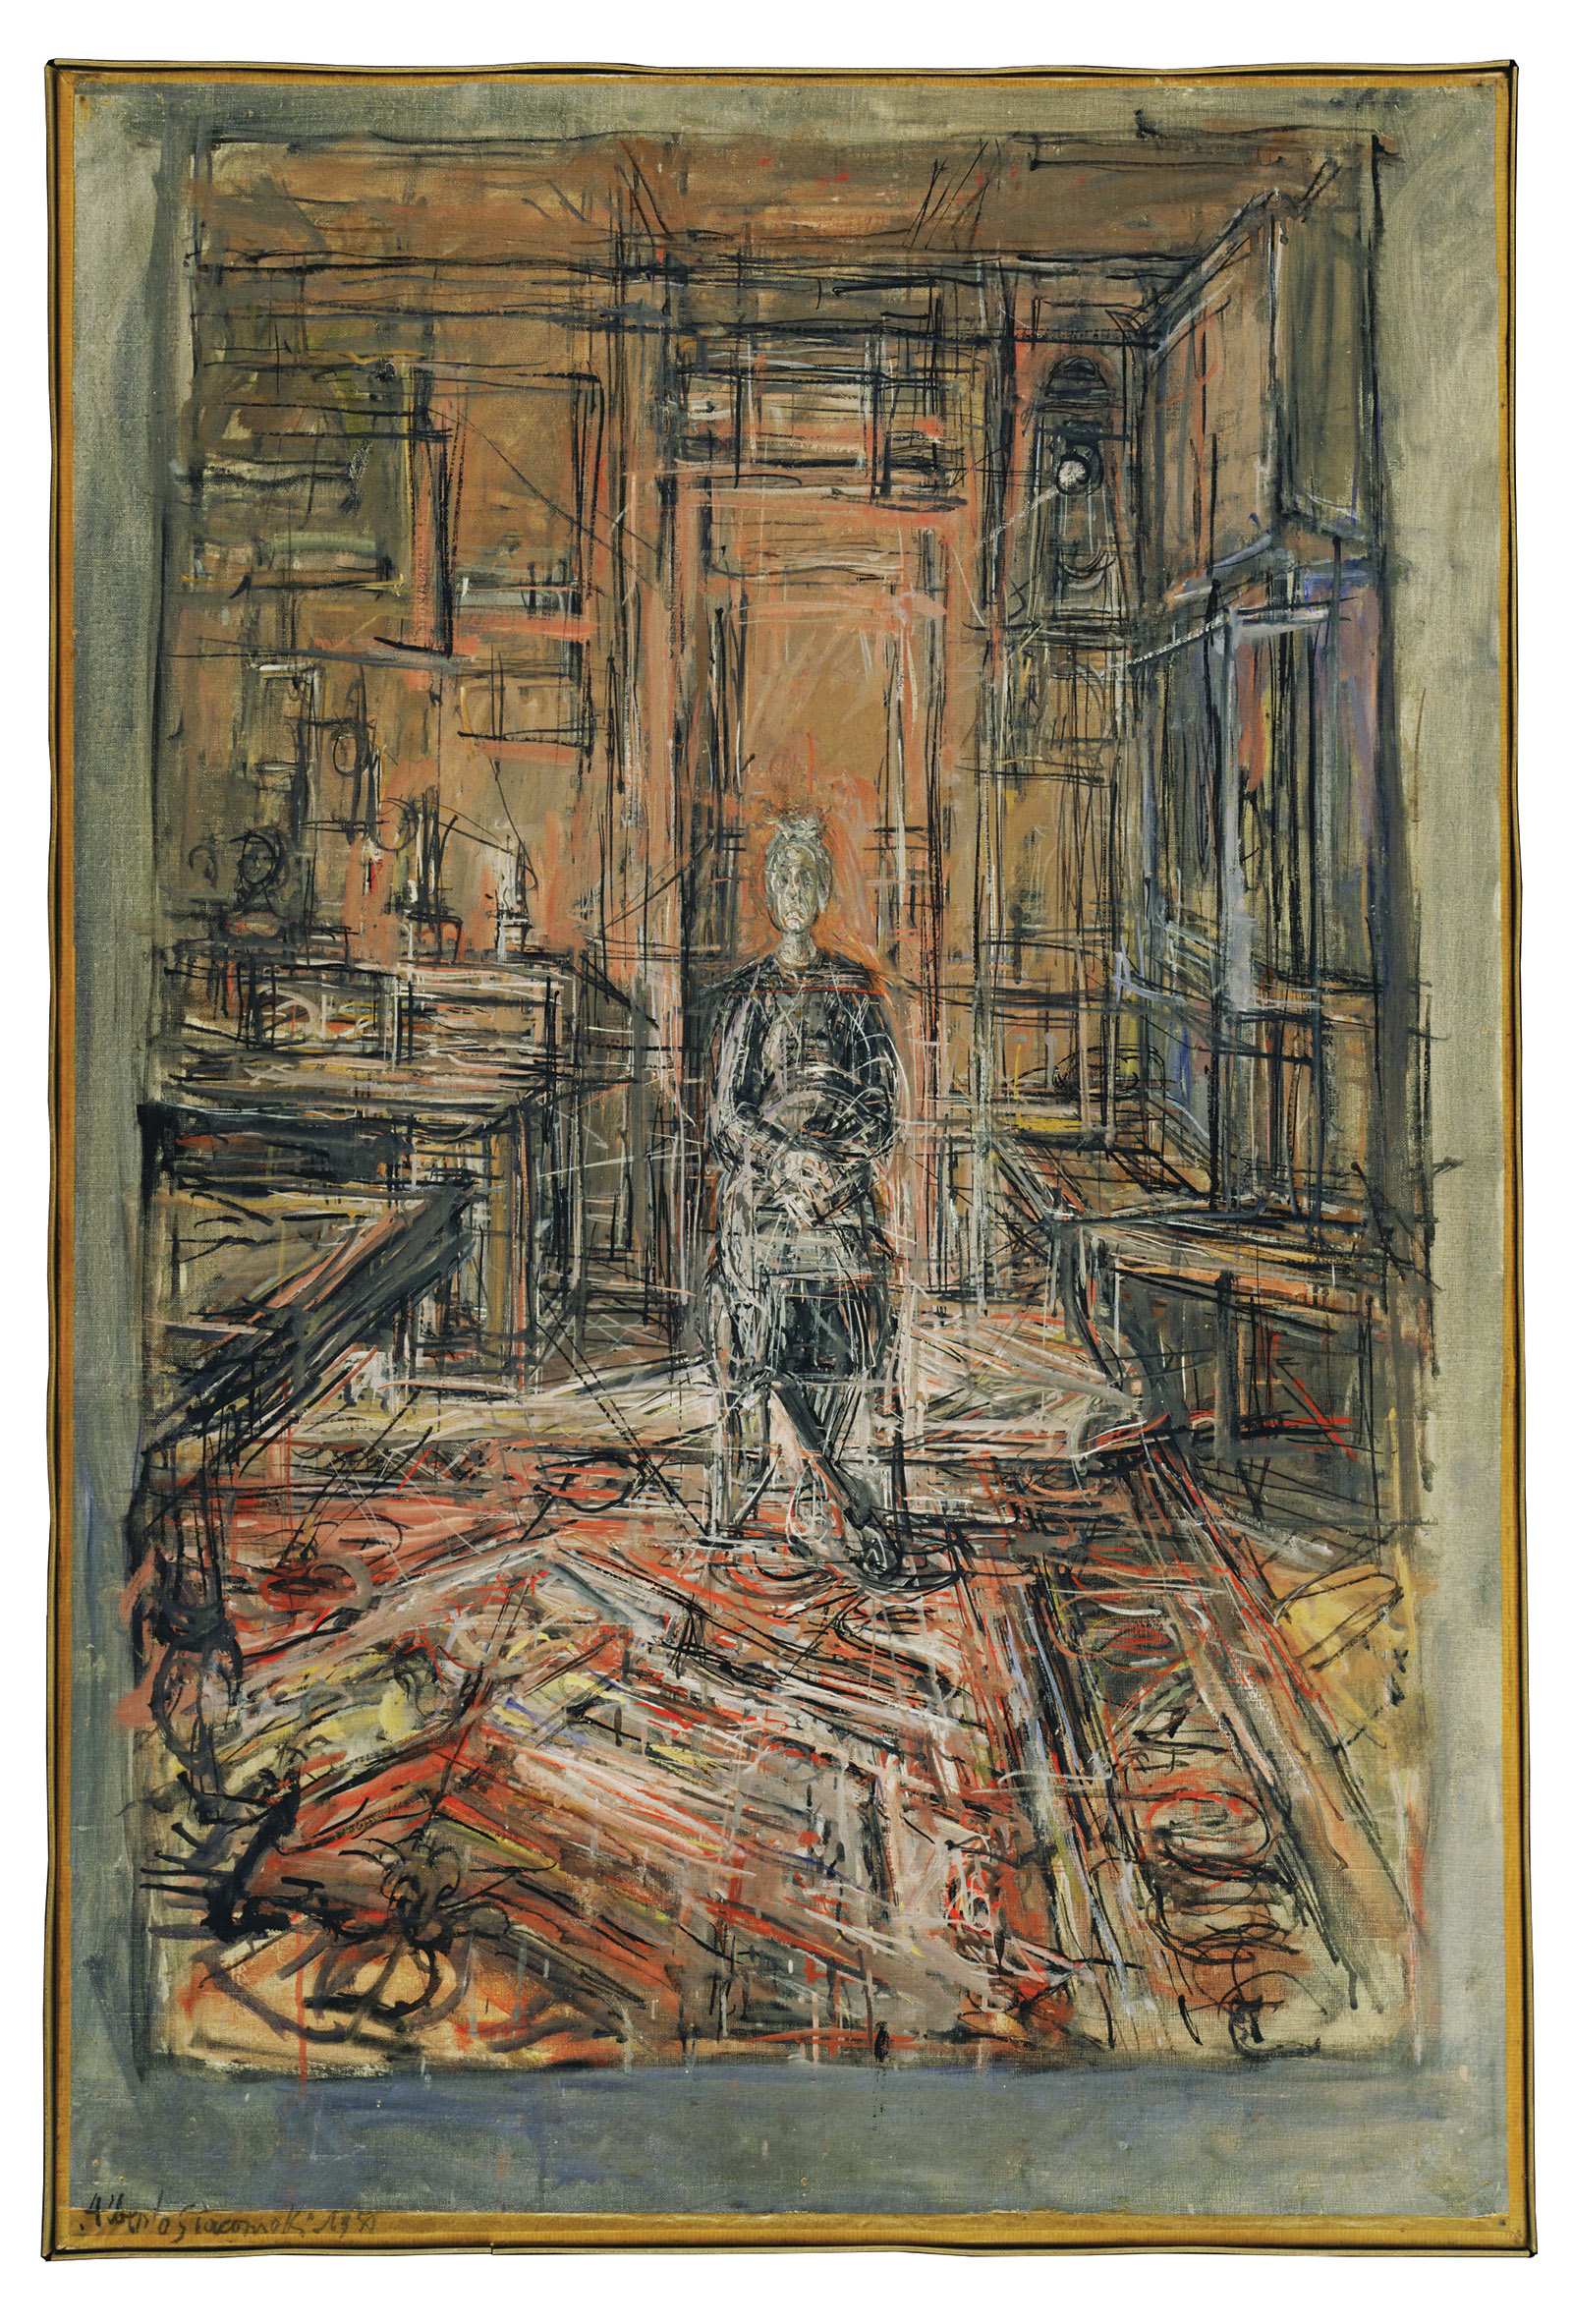 The Artist’s Mother; painting by Alberto Giacometti